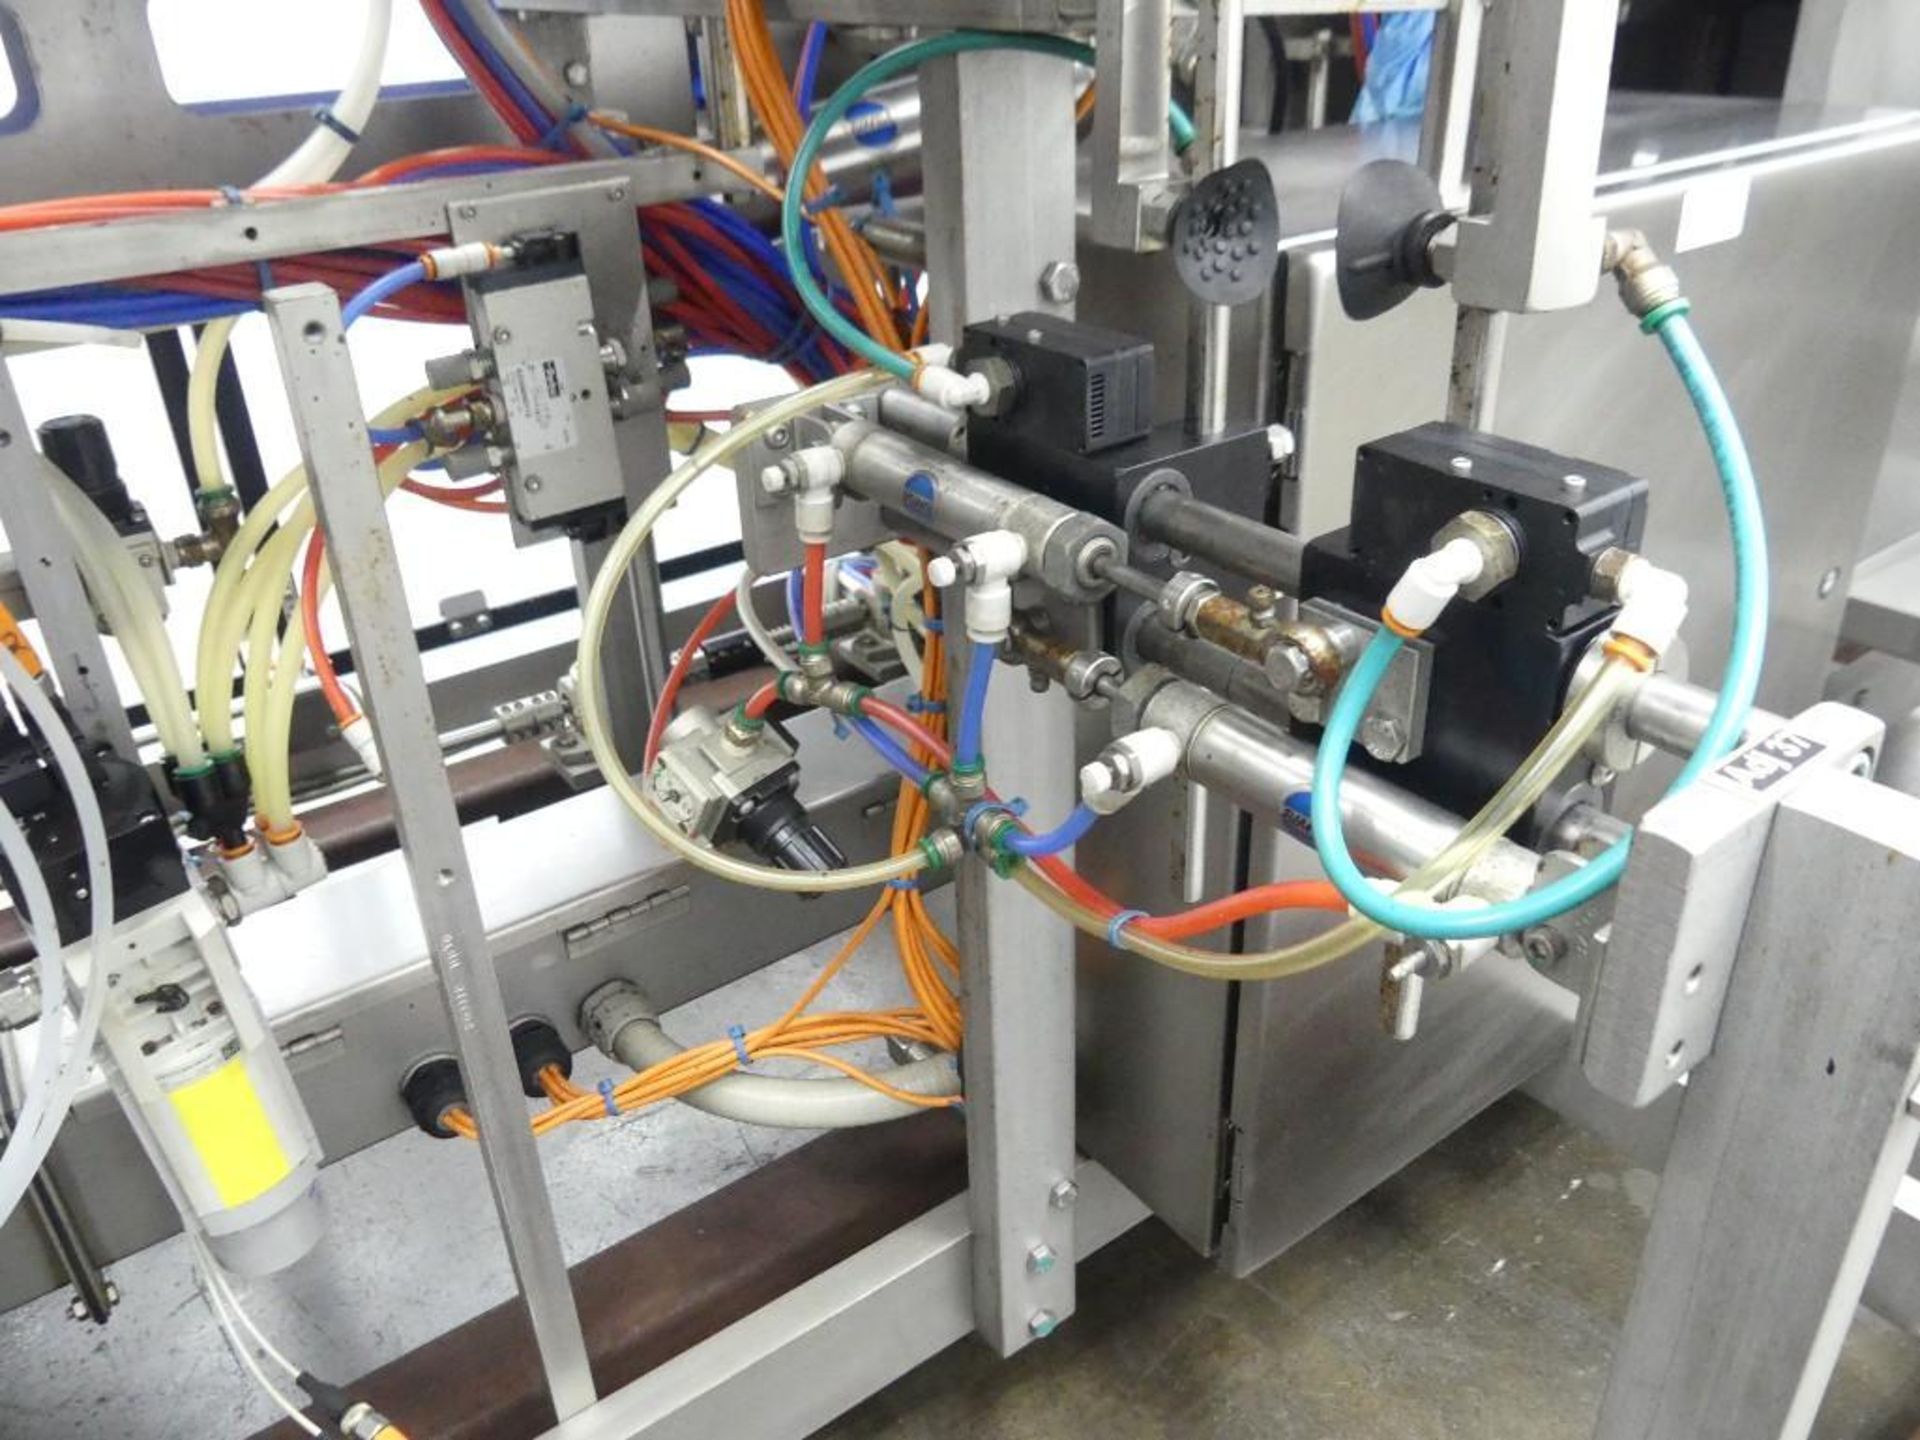 Massman HFFS-IM1000 Flexible Pouch Packaging System - Image 30 of 127